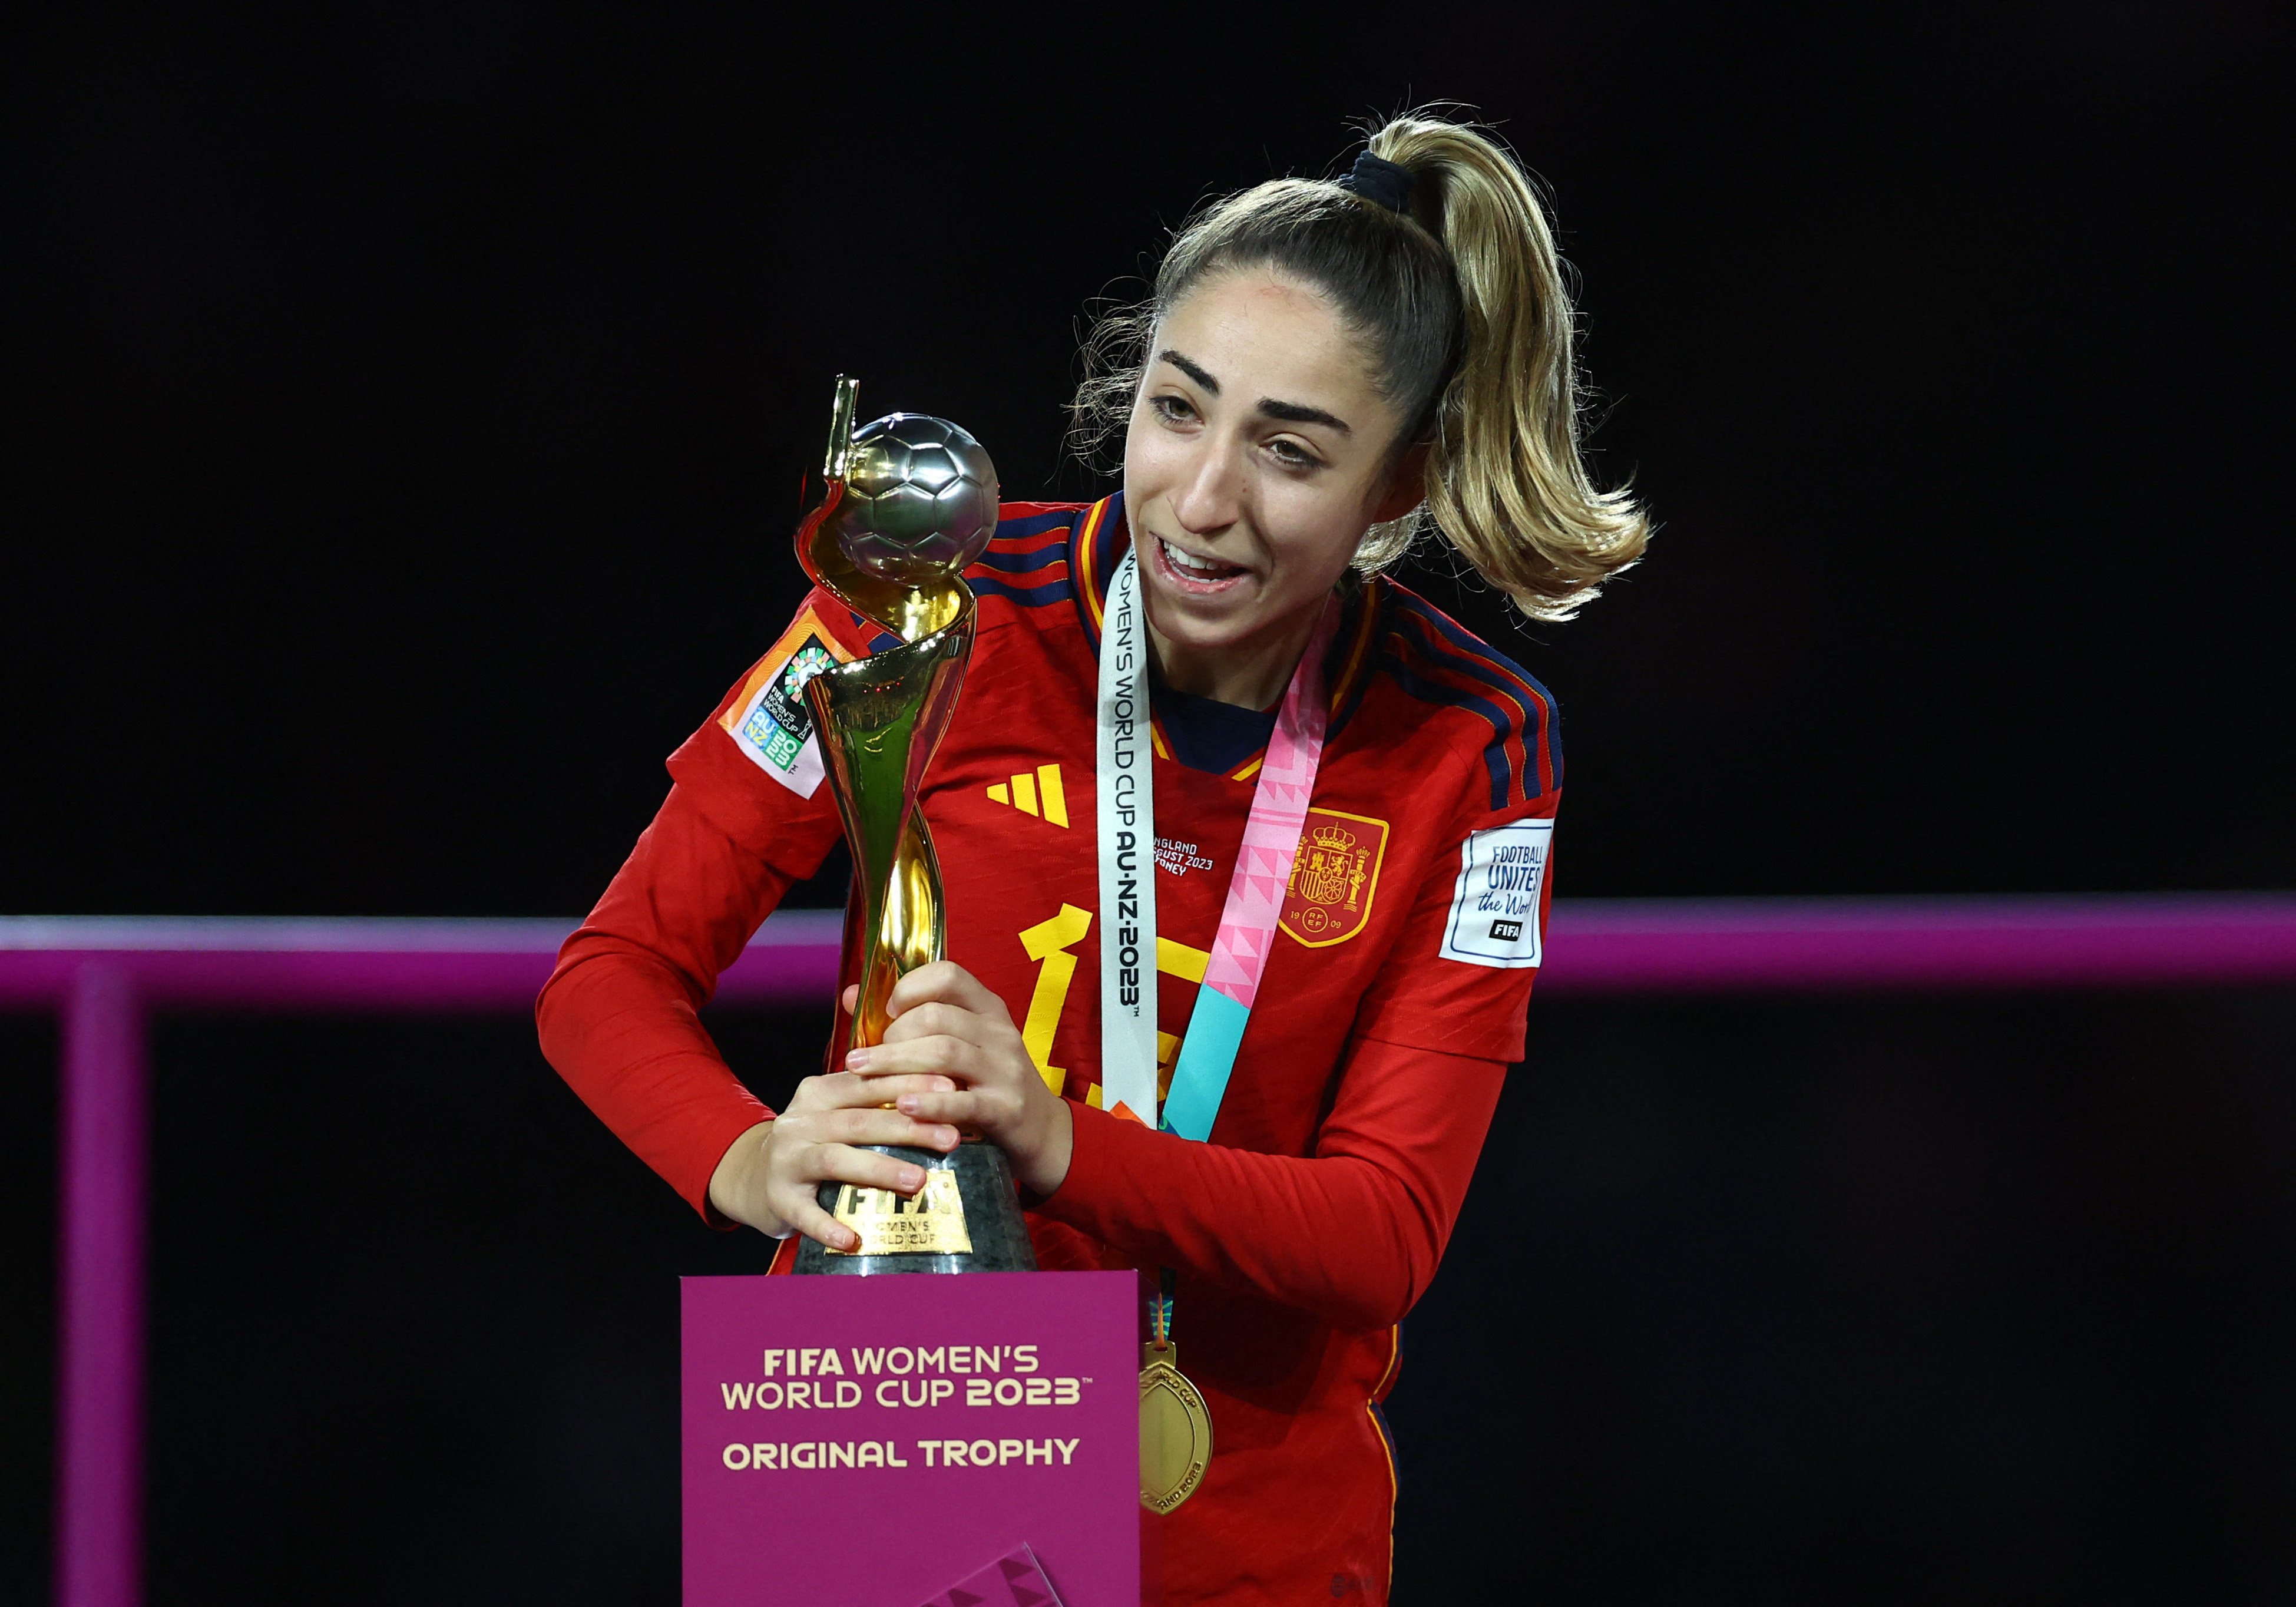 Spain’s Olga Carmona became the first player to score in a World Cup semi-final and final since 2015. Photo: Reuters